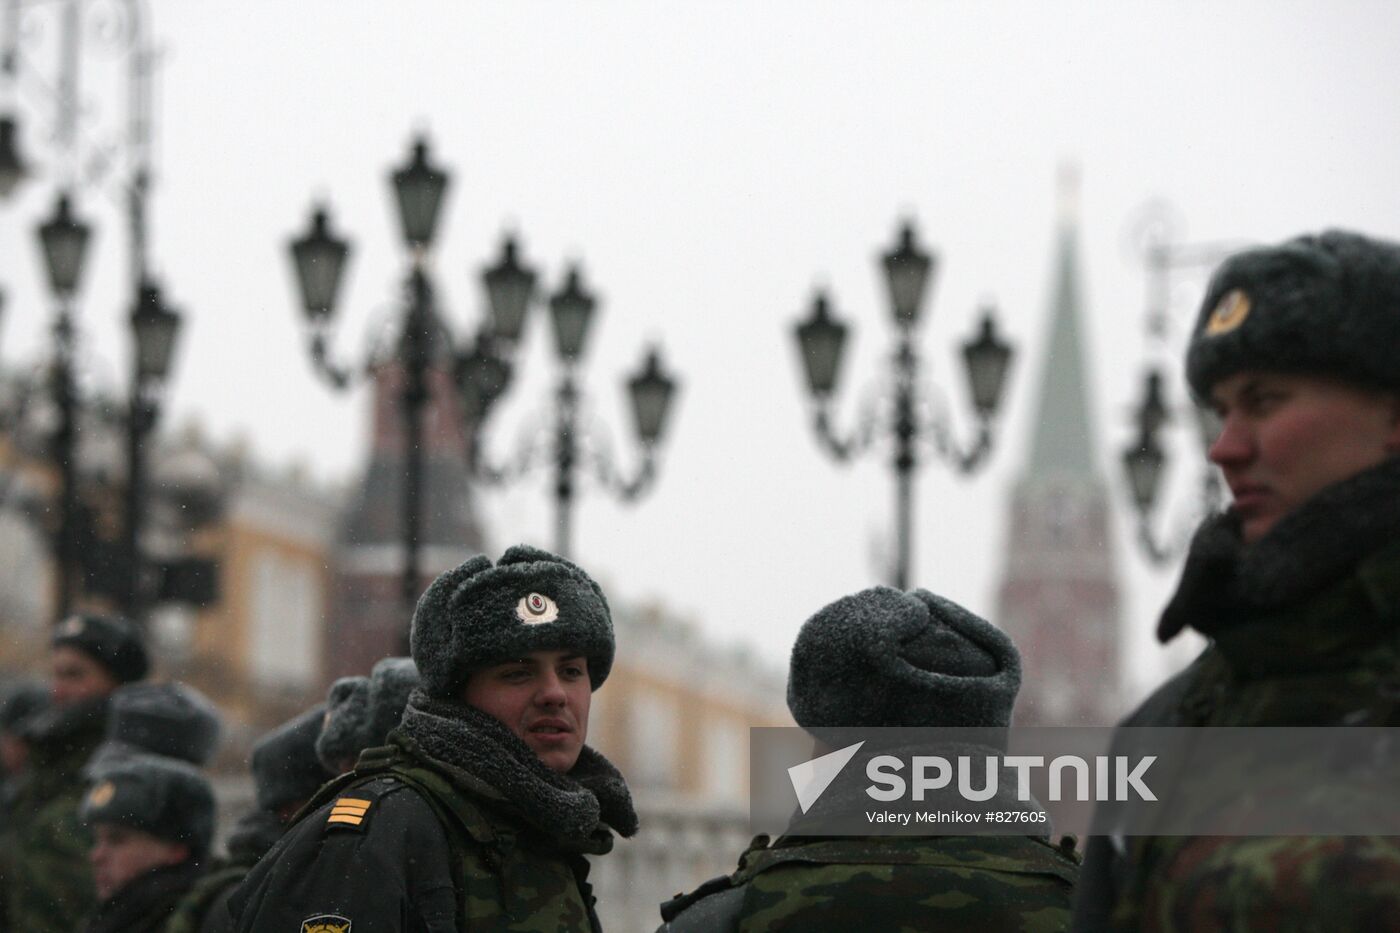 Police on alert on Moscow's Manezh Square